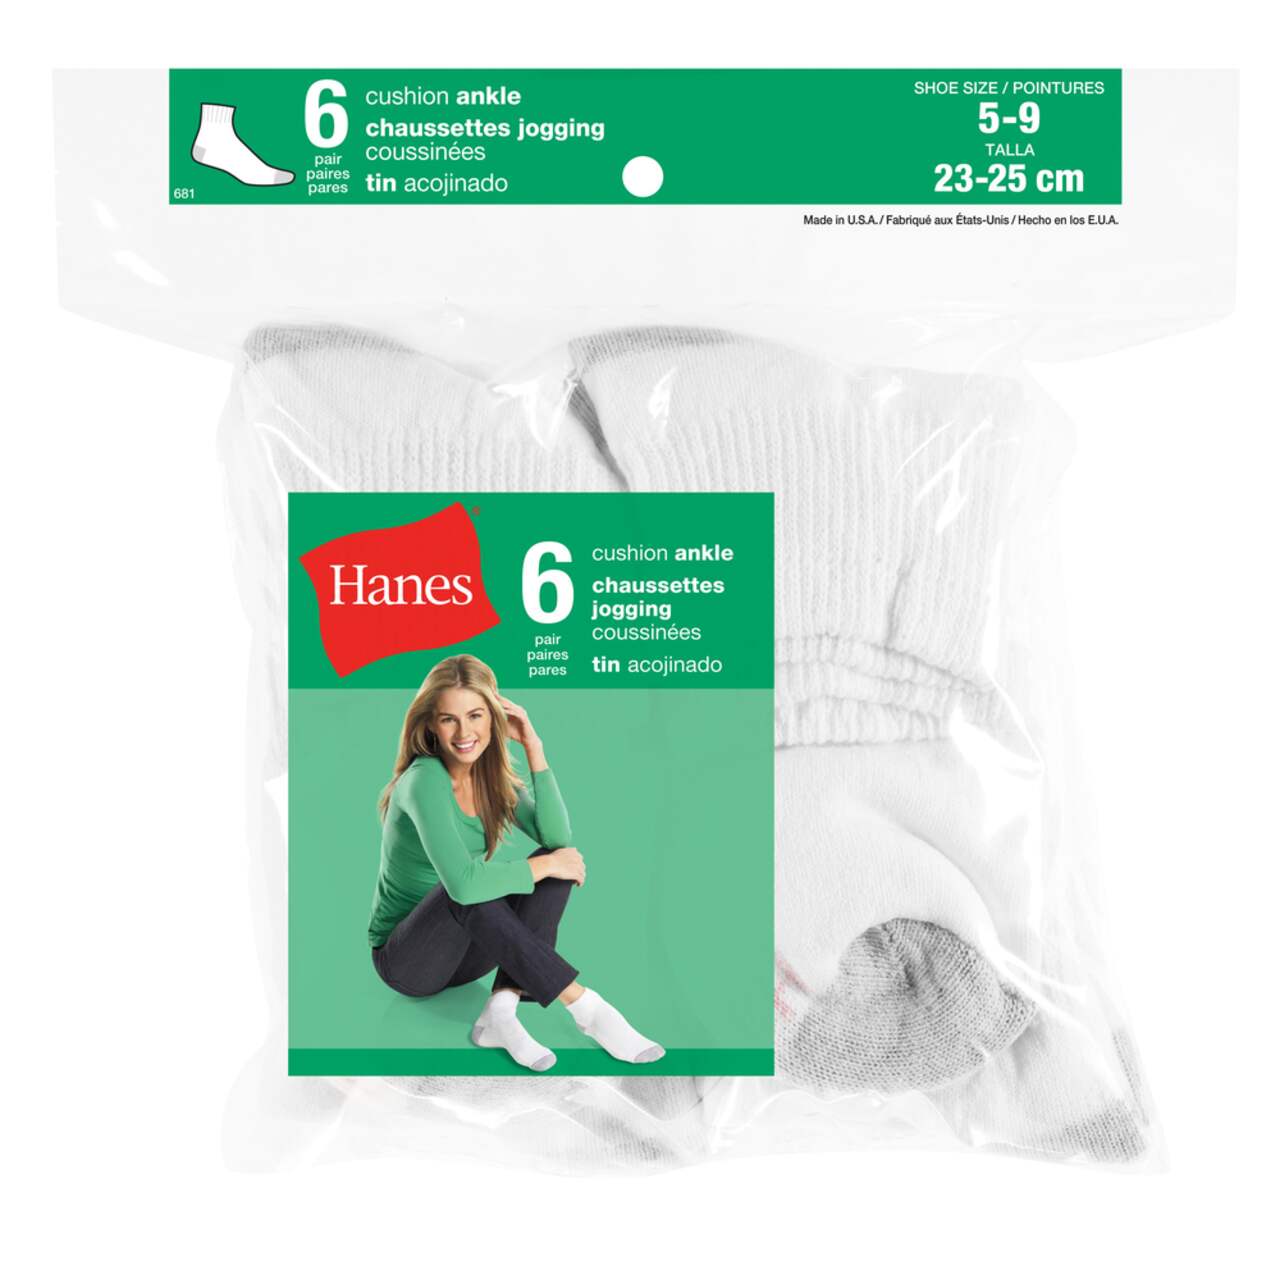 Hanes Women's Athletic Ankle Socks, Full Sole Cushion, 10-Pairs